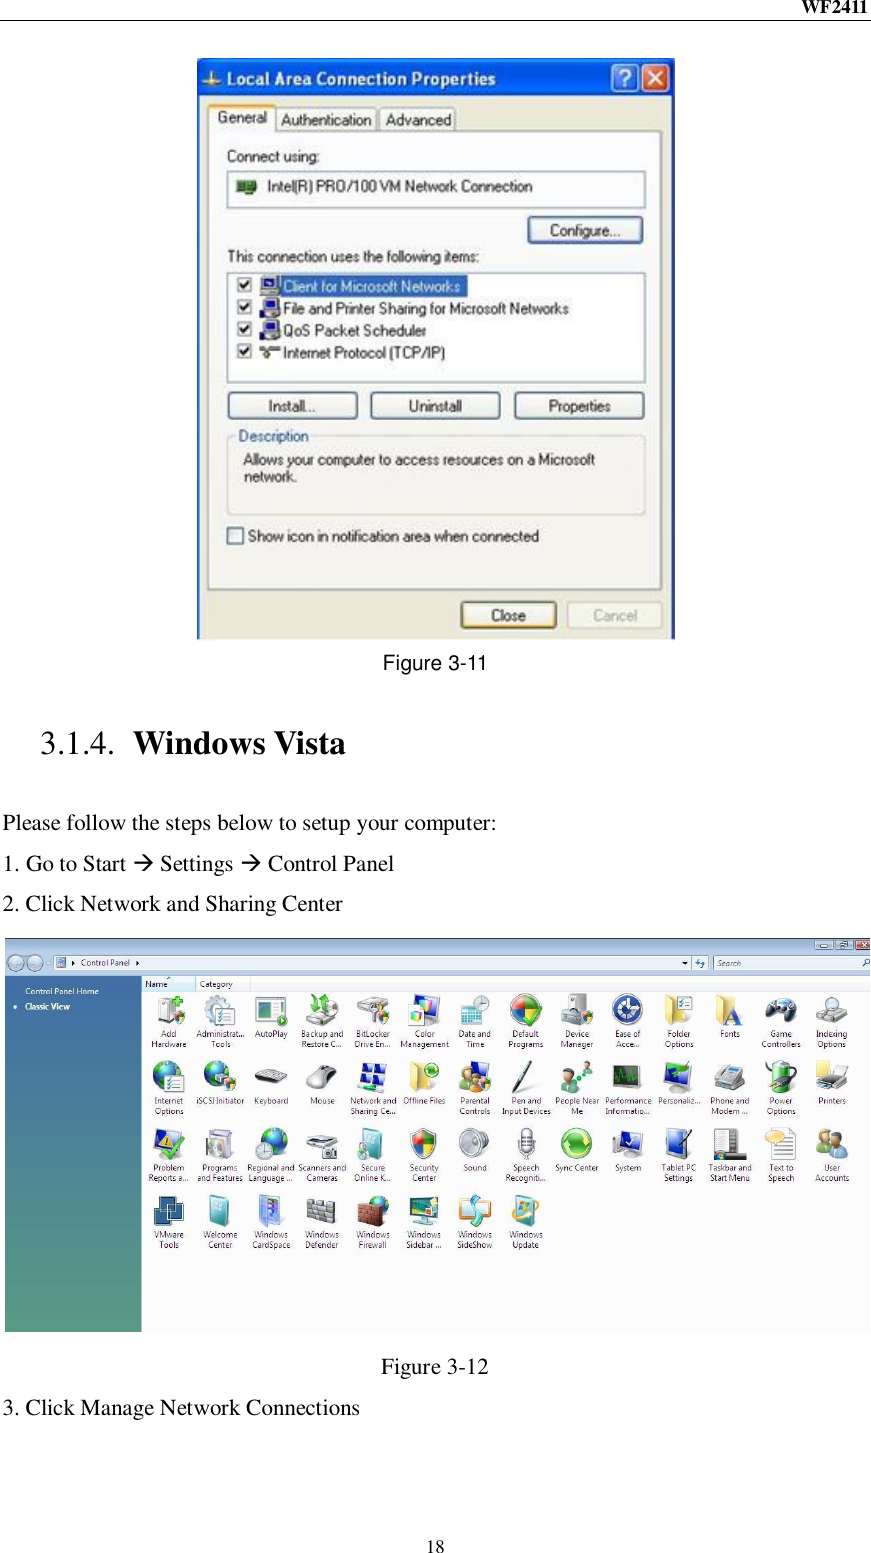 WF2411  18  Figure 3-11 3.1.4. Windows Vista Please follow the steps below to setup your computer: 1. Go to Start  Settings  Control Panel 2. Click Network and Sharing Center  Figure 3-12 3. Click Manage Network Connections 